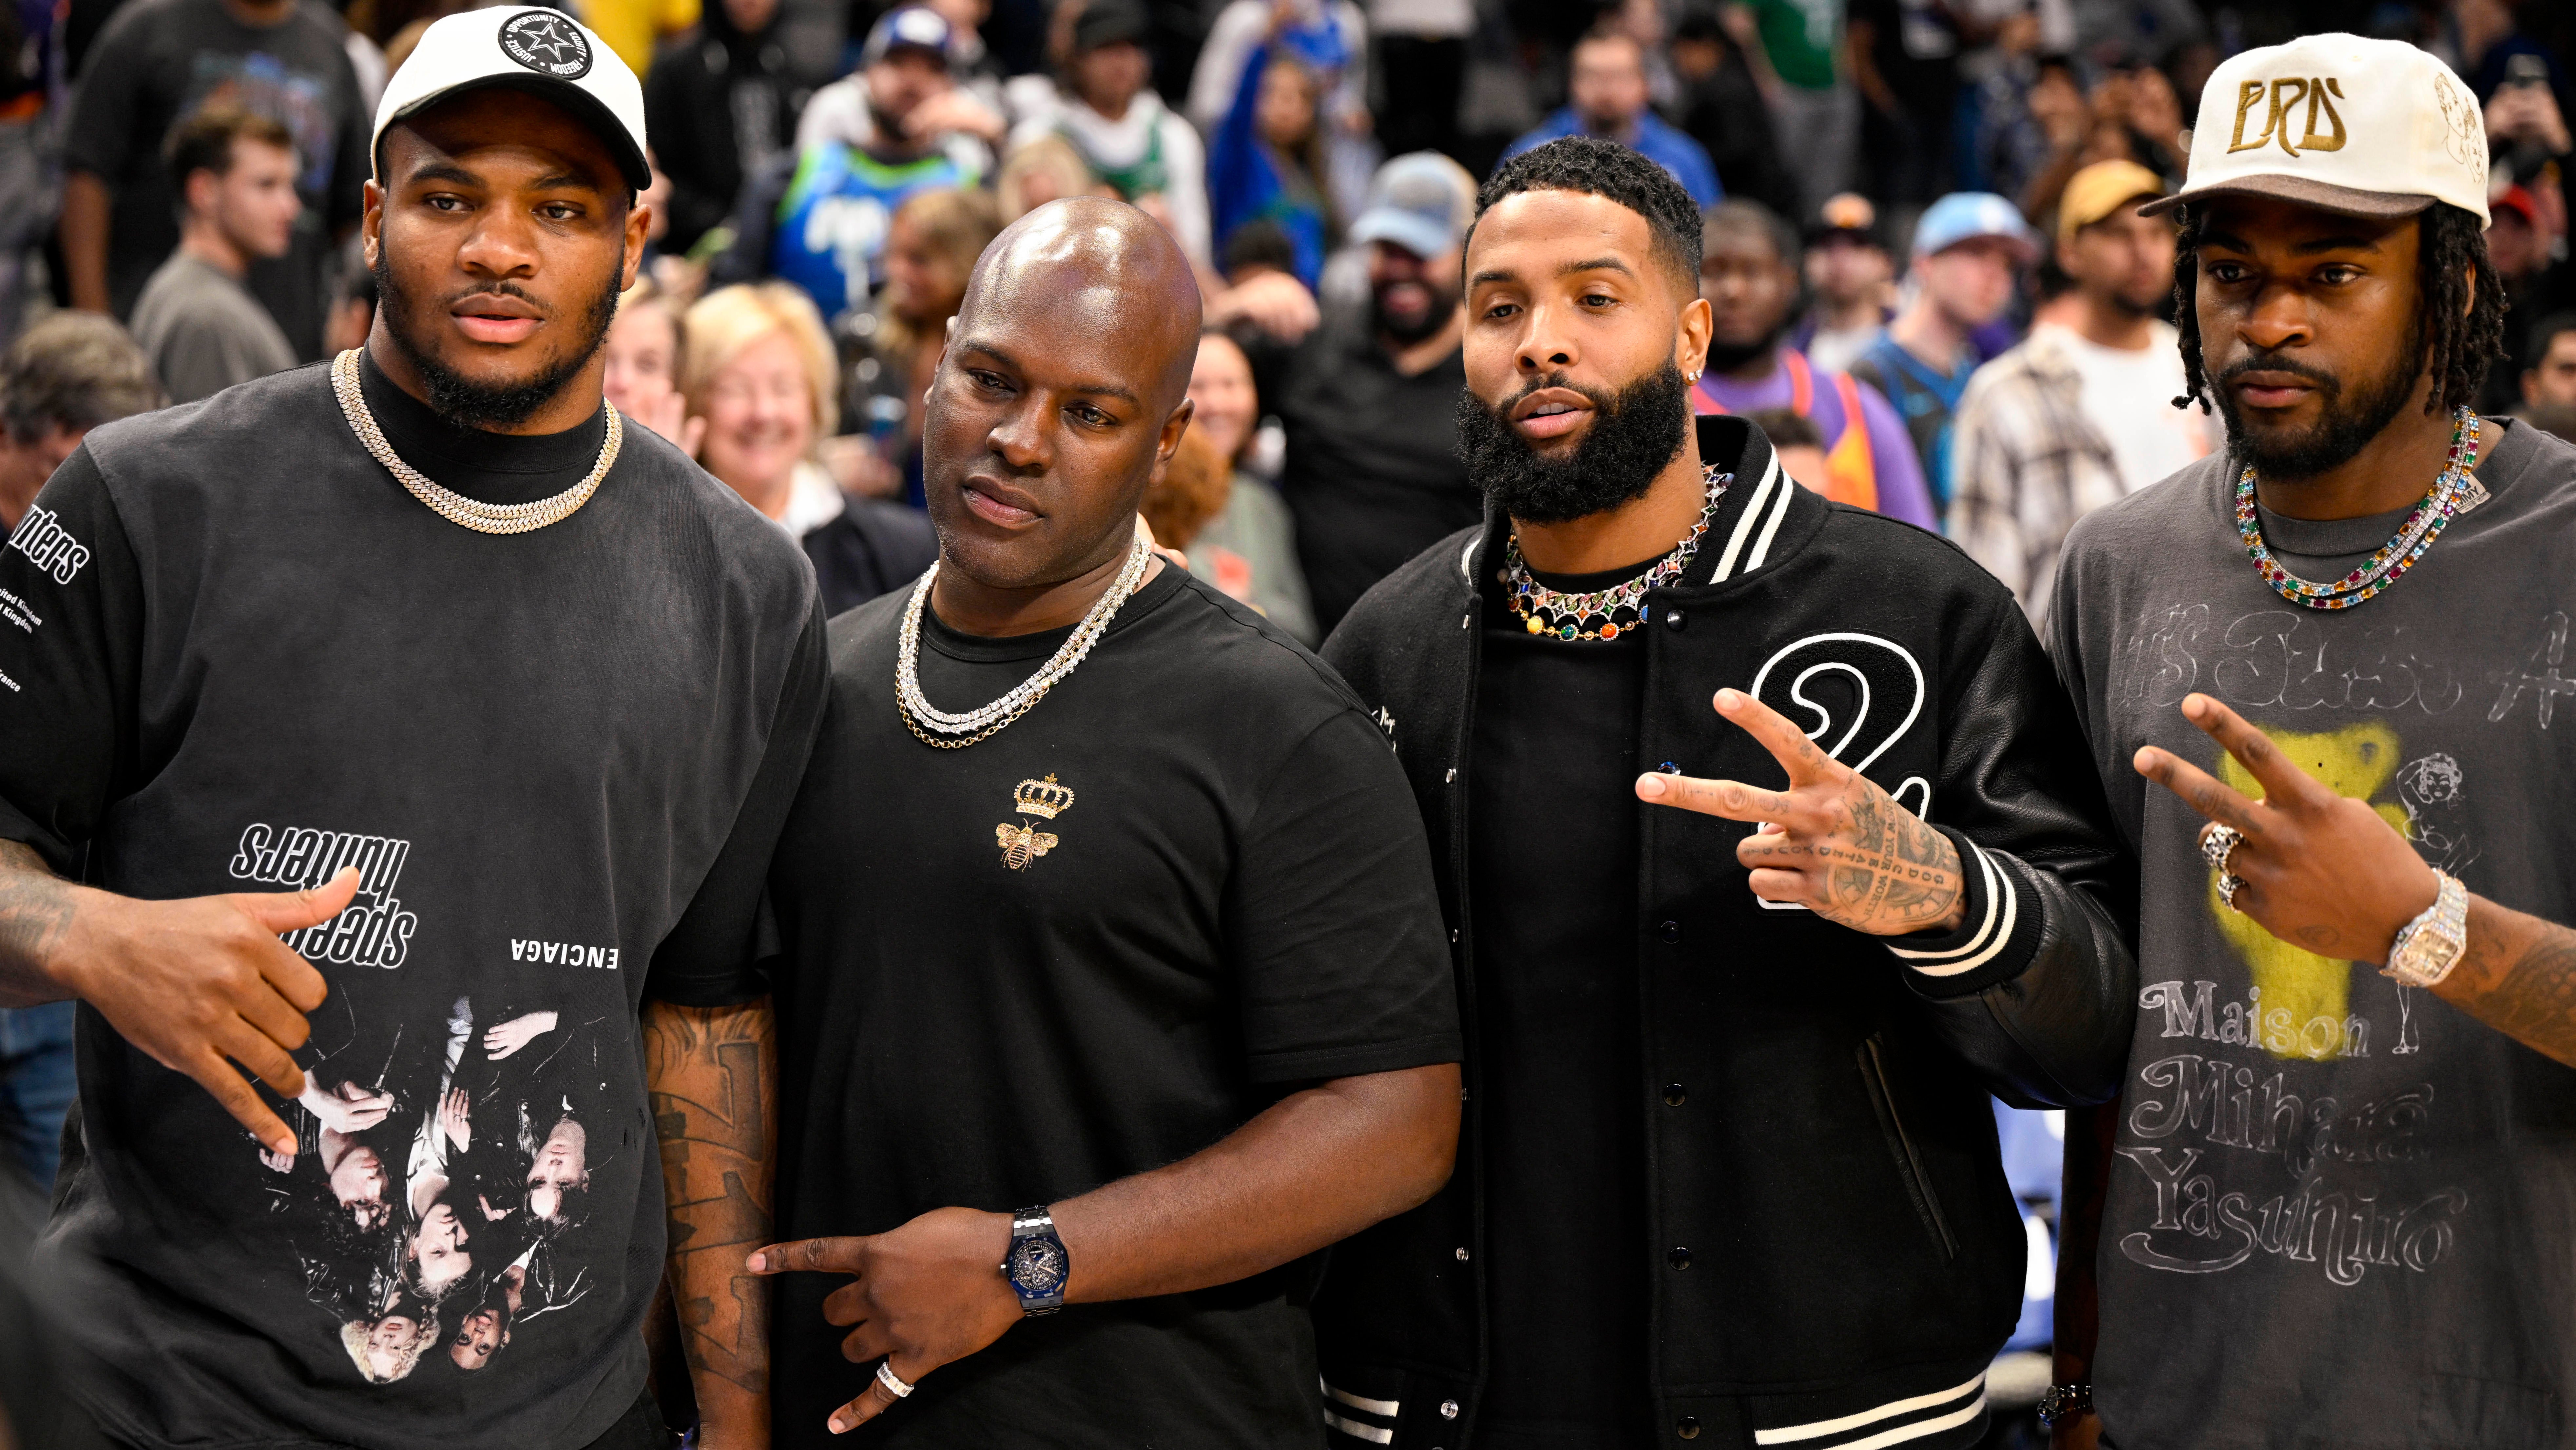 Odell Beckham Jr. says joining Cowboys 'good possibility' while at Mavericks game with Micah Parsons